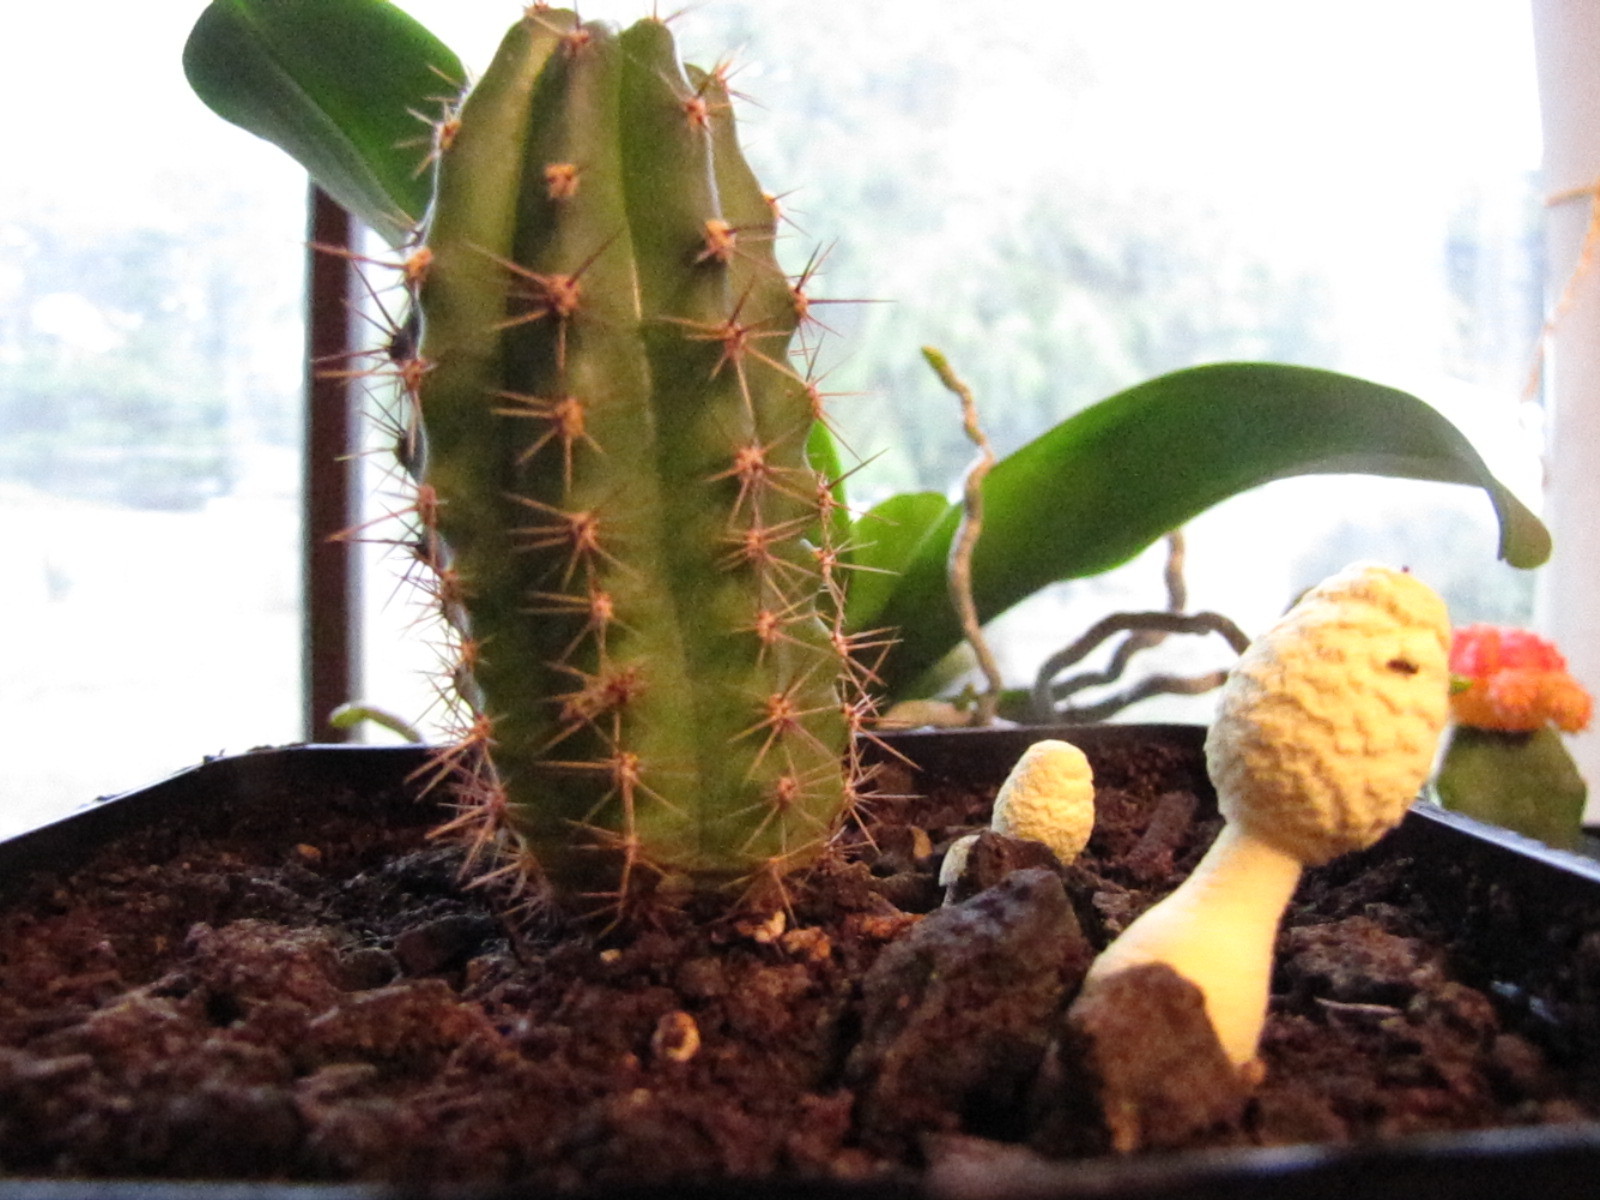 Are mushrooms bad for the cactus? - The Ethnobotanical Garden ...